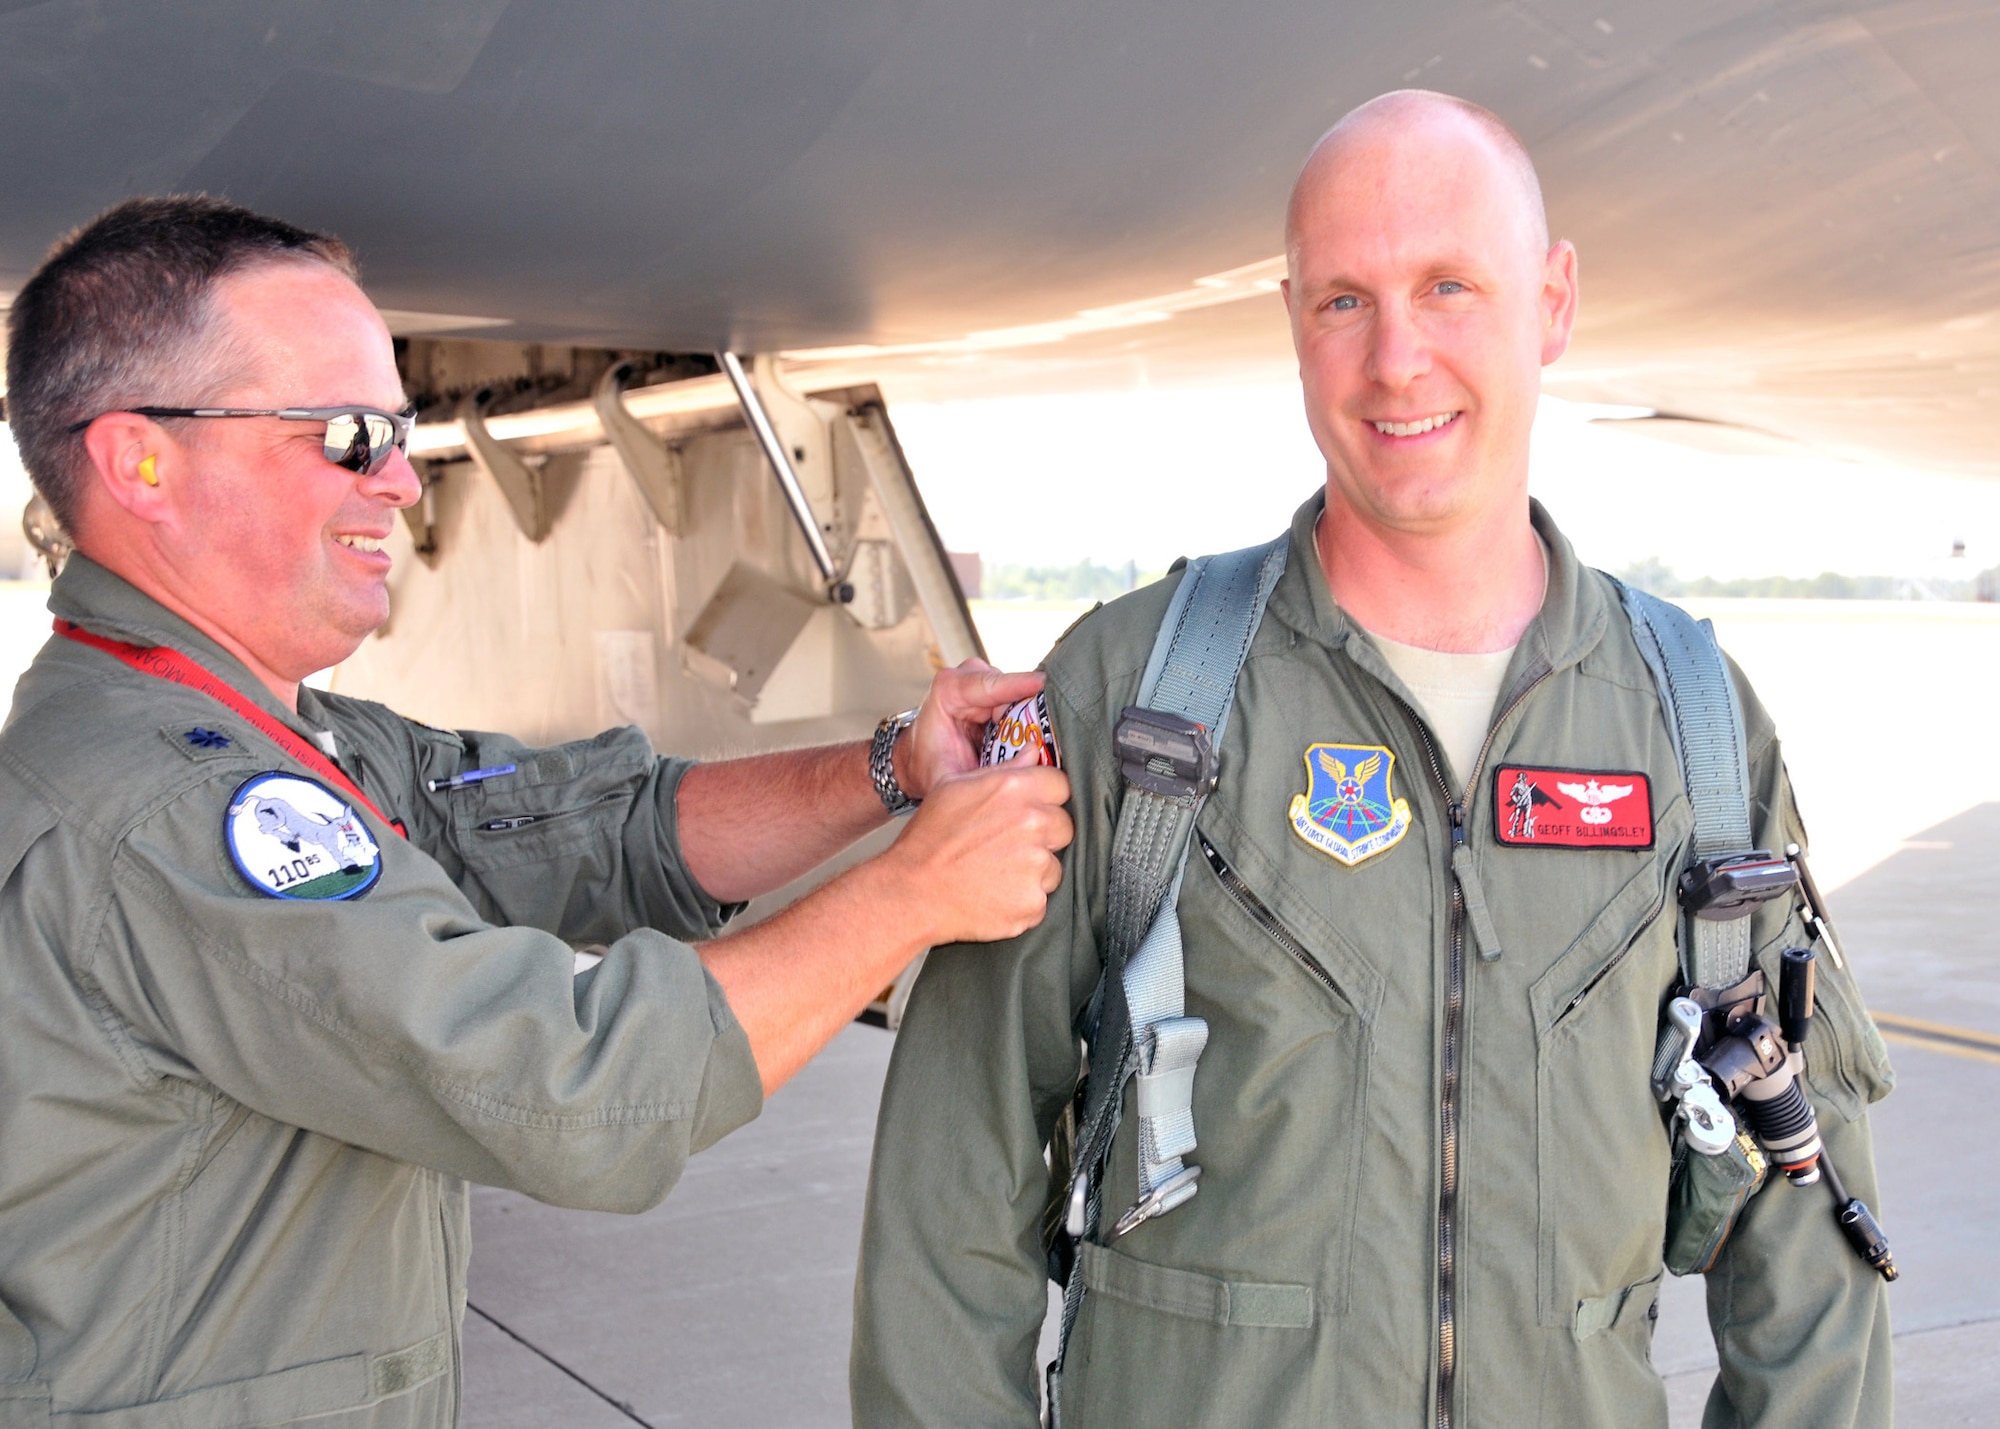 Lt. Col. Mike Pyburn, 131st Operations Group Commander, presents Maj Geoffrey Billingsley with his 1000 B-2 flying hour patch, June 27.  Billingsley achieved 1000 hours on June 13.  Only 31 pilots have ever reached 1000 B-2 hours, and just thirteen still actively fly the B-2 Stealth Bomber.  Seven of these elite pilots are 131st Bomb Wing Missouri Air National Guard members at Whiteman Air Force Base:  Lt. Col. Rhett Binger,  Lt. Col. Mike Pyburn, Lt. Col. Dave Thompson,  Maj. Jared Kennish, Maj. John Avery,  Maj. Geoffrey Billingsley, and Lt. Col. Mike Means, who has over 1500 B-2 flying hours.(National Guard Photo by Senior Master Sgt. Mary-Dale Amison.  RELEASED)